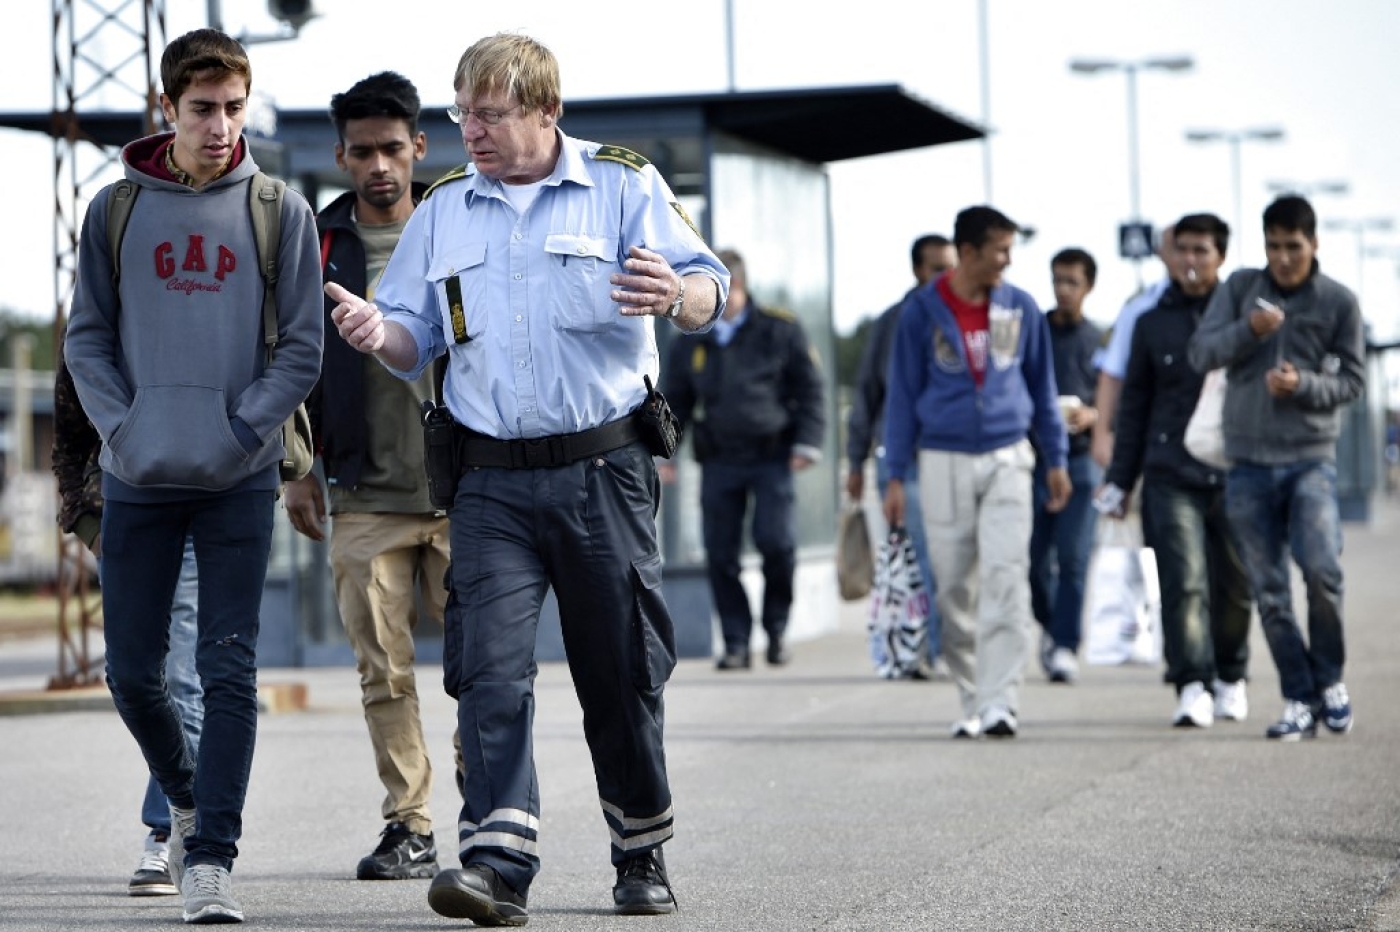 In early March, Denmark revoked the residency permits of 94 Syrian refugees living in the country.